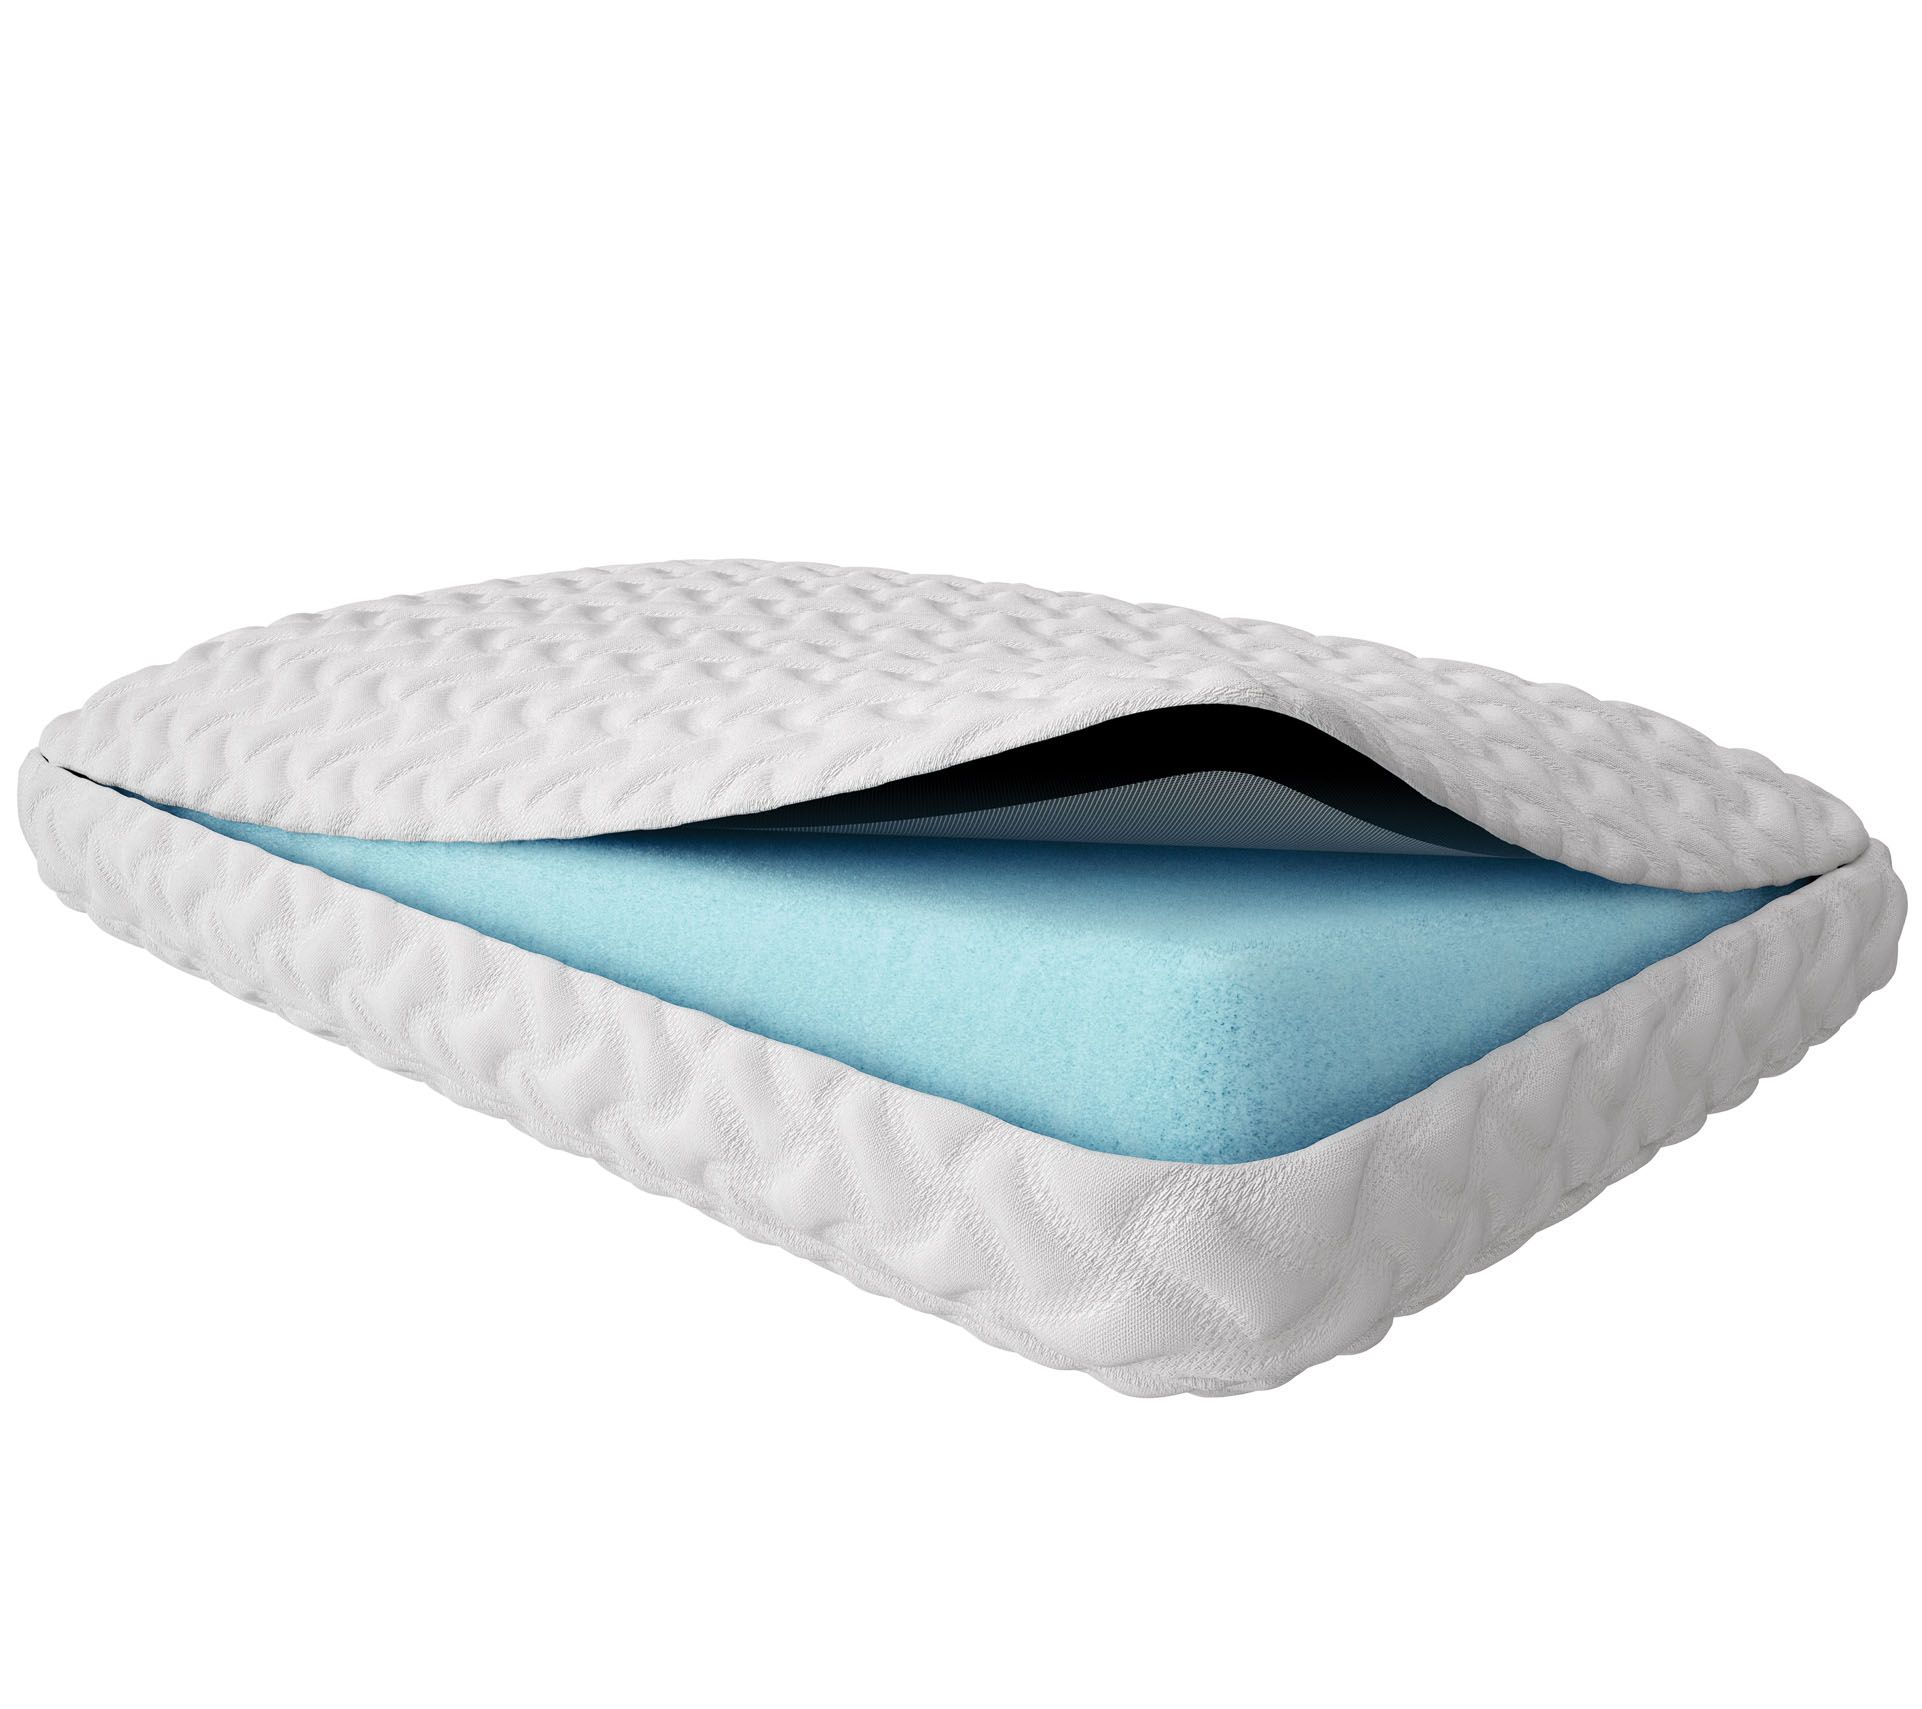 Barefoot Dreams CozyChic and LuxeChic Bed Rest Pillow - Carbon